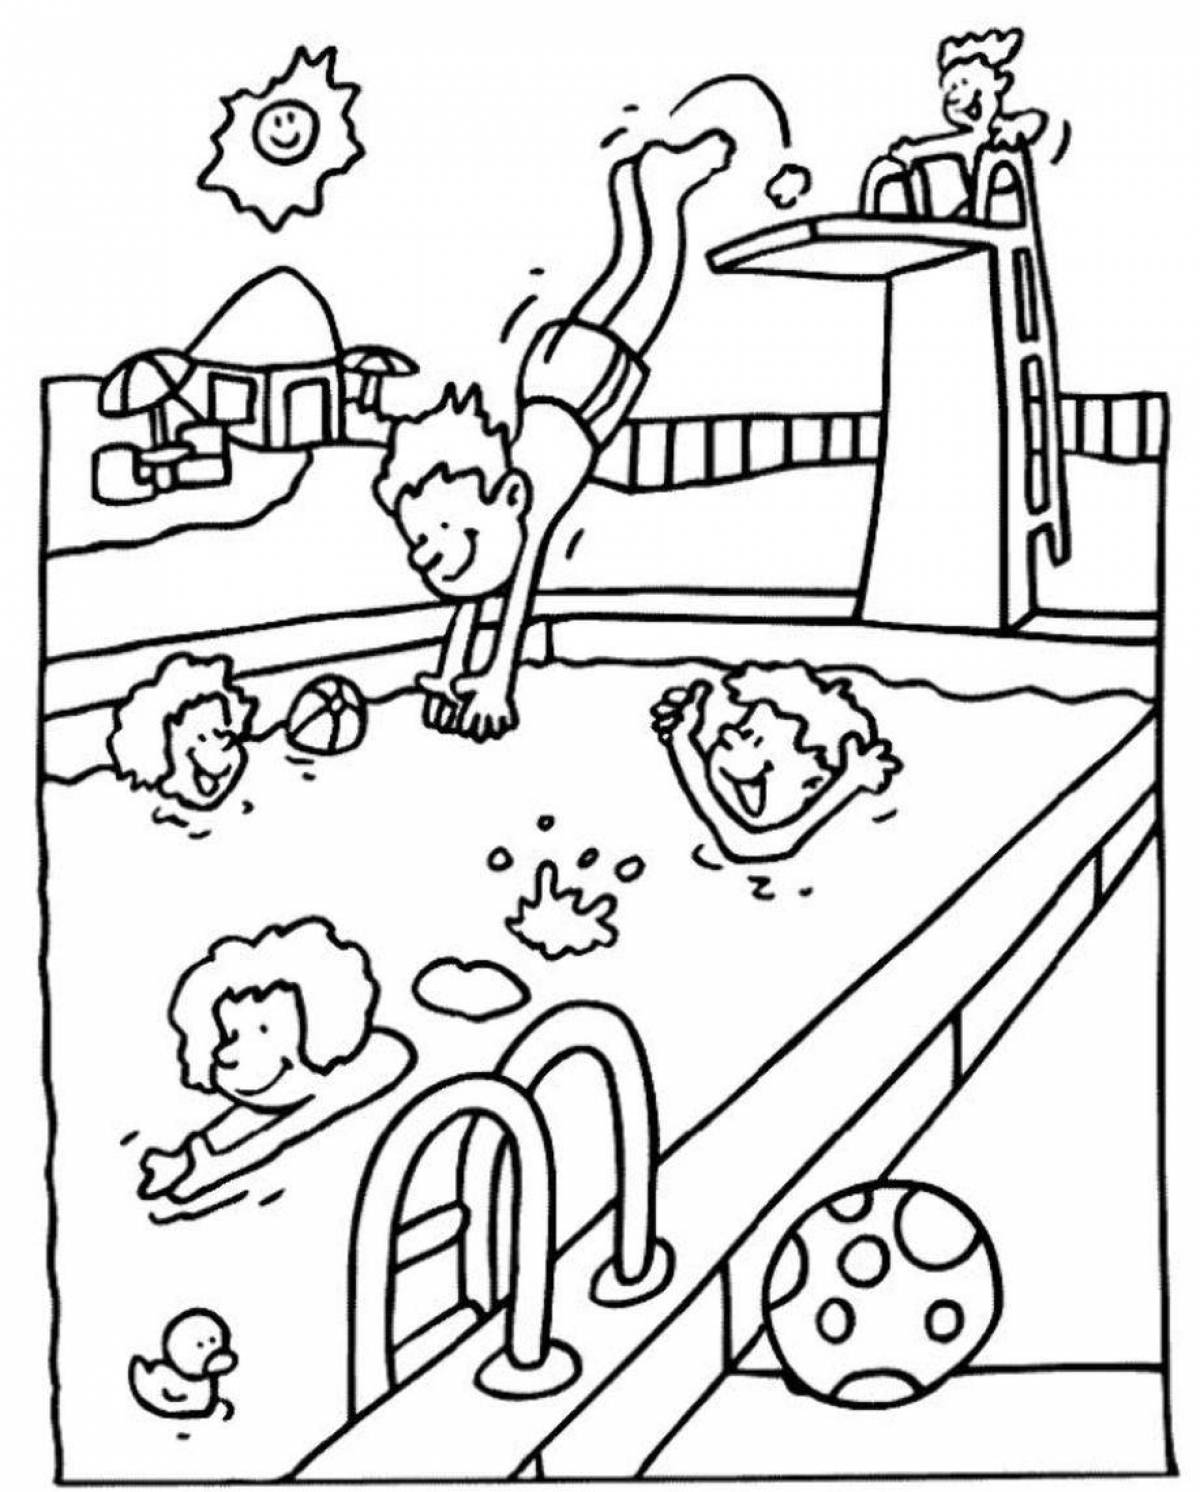 Coloring page gorgeous swimming pool